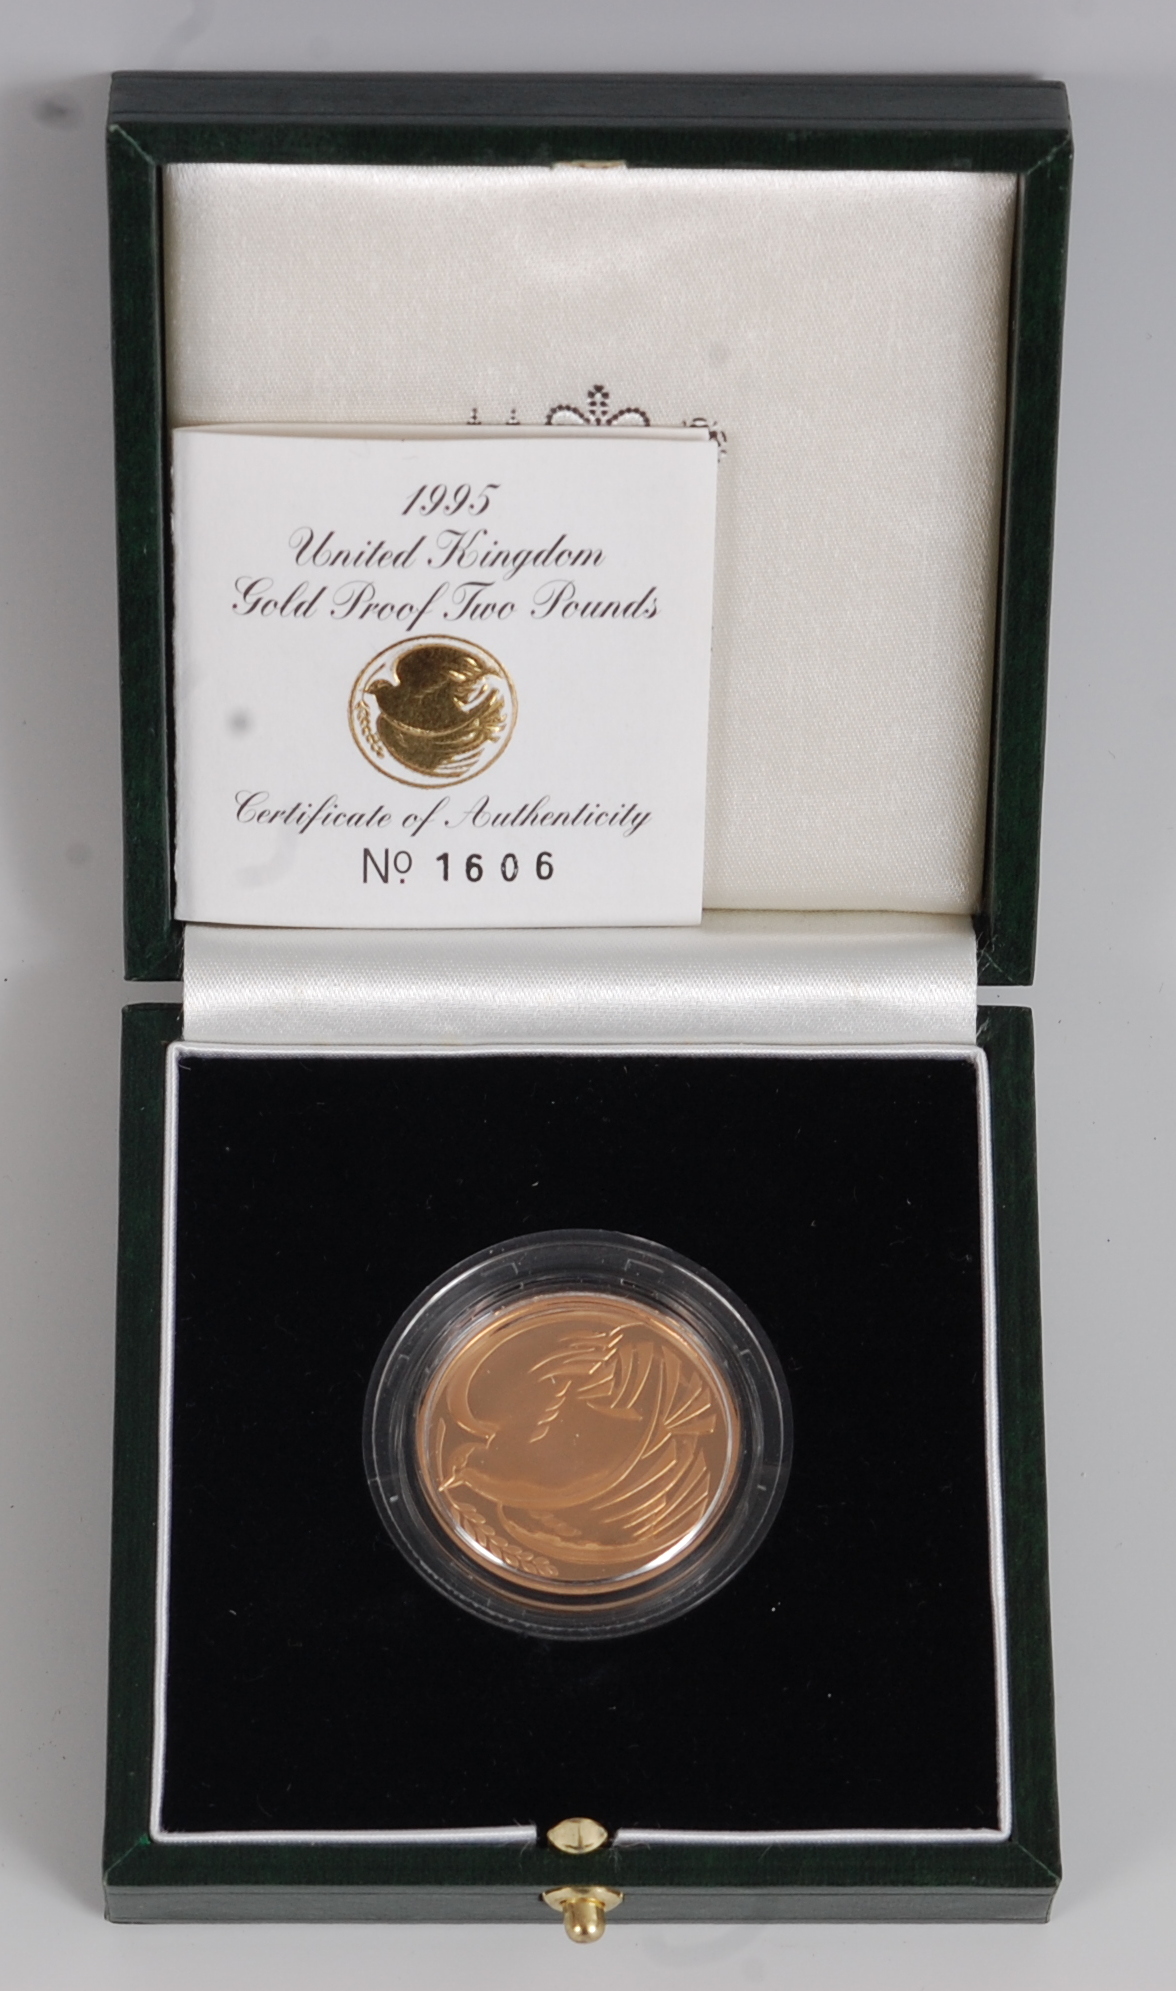 Great Britain, a cased 1995 gold proof two-pound coin, with certificate of authenticity. (1)